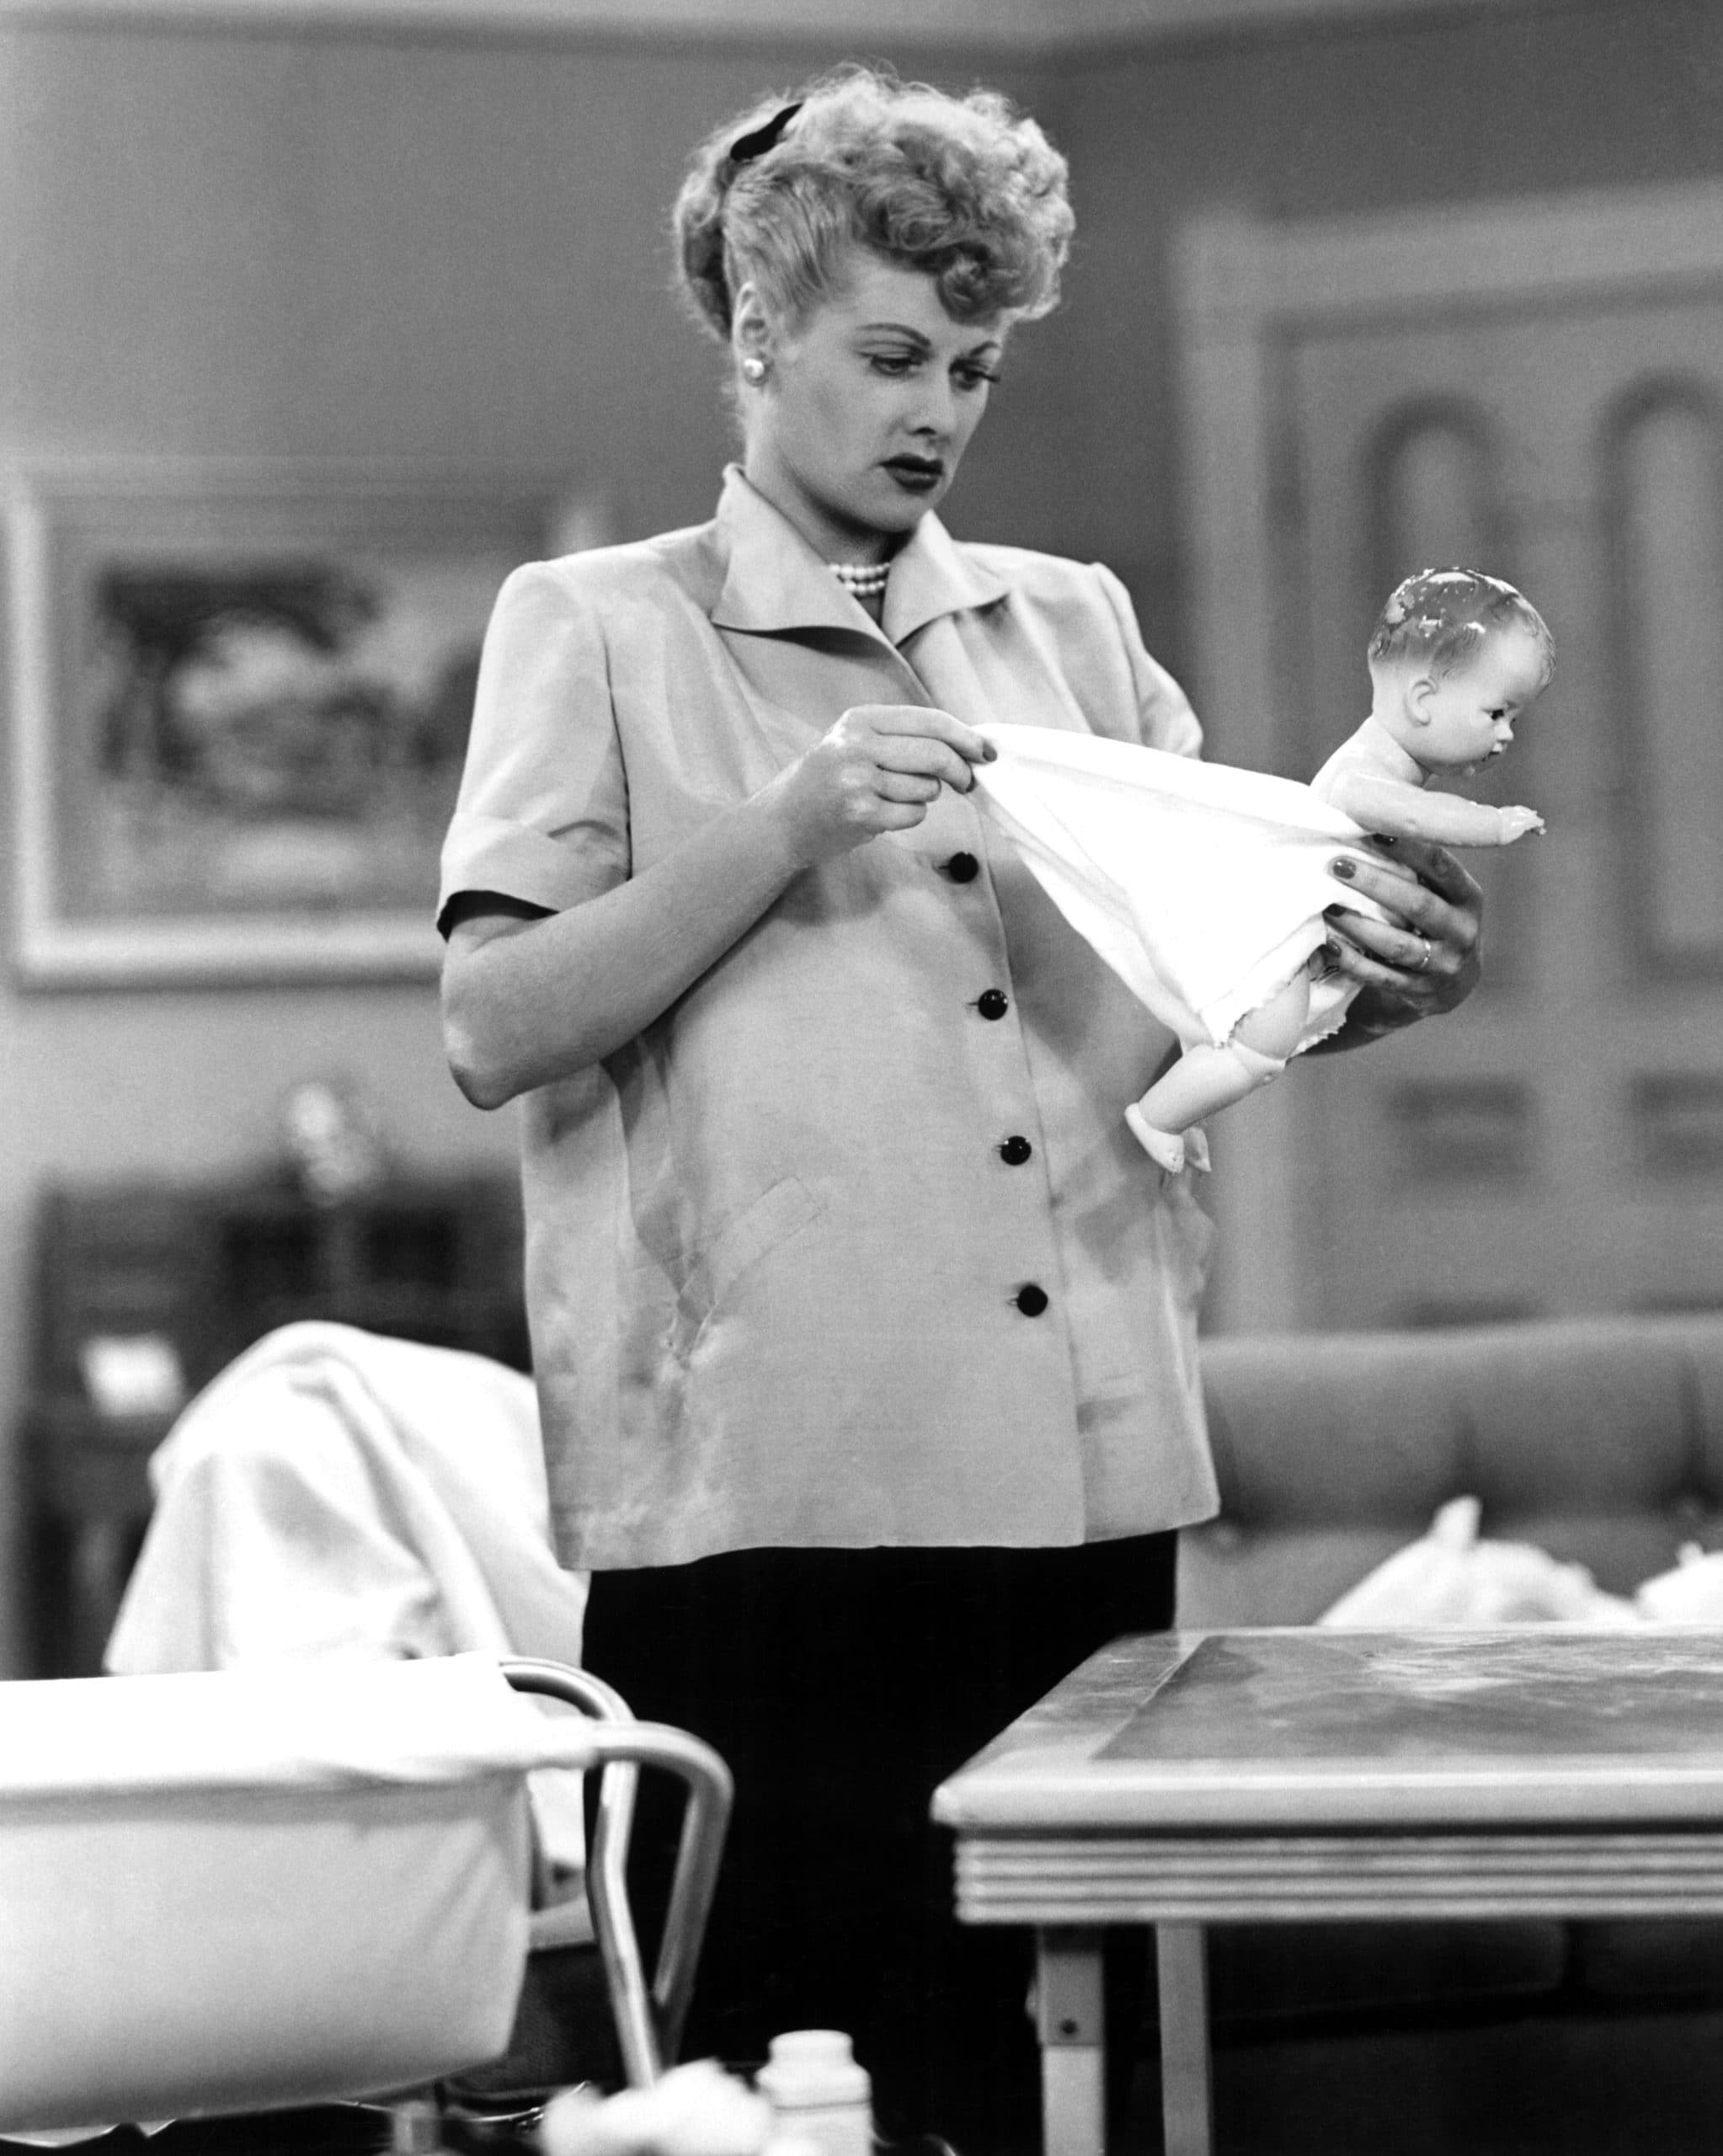 I LOVE LUCY, "Pregnant Women Are Unpredictable", aired Dec. 15, 1952, Lucille Ball, 1951-1957